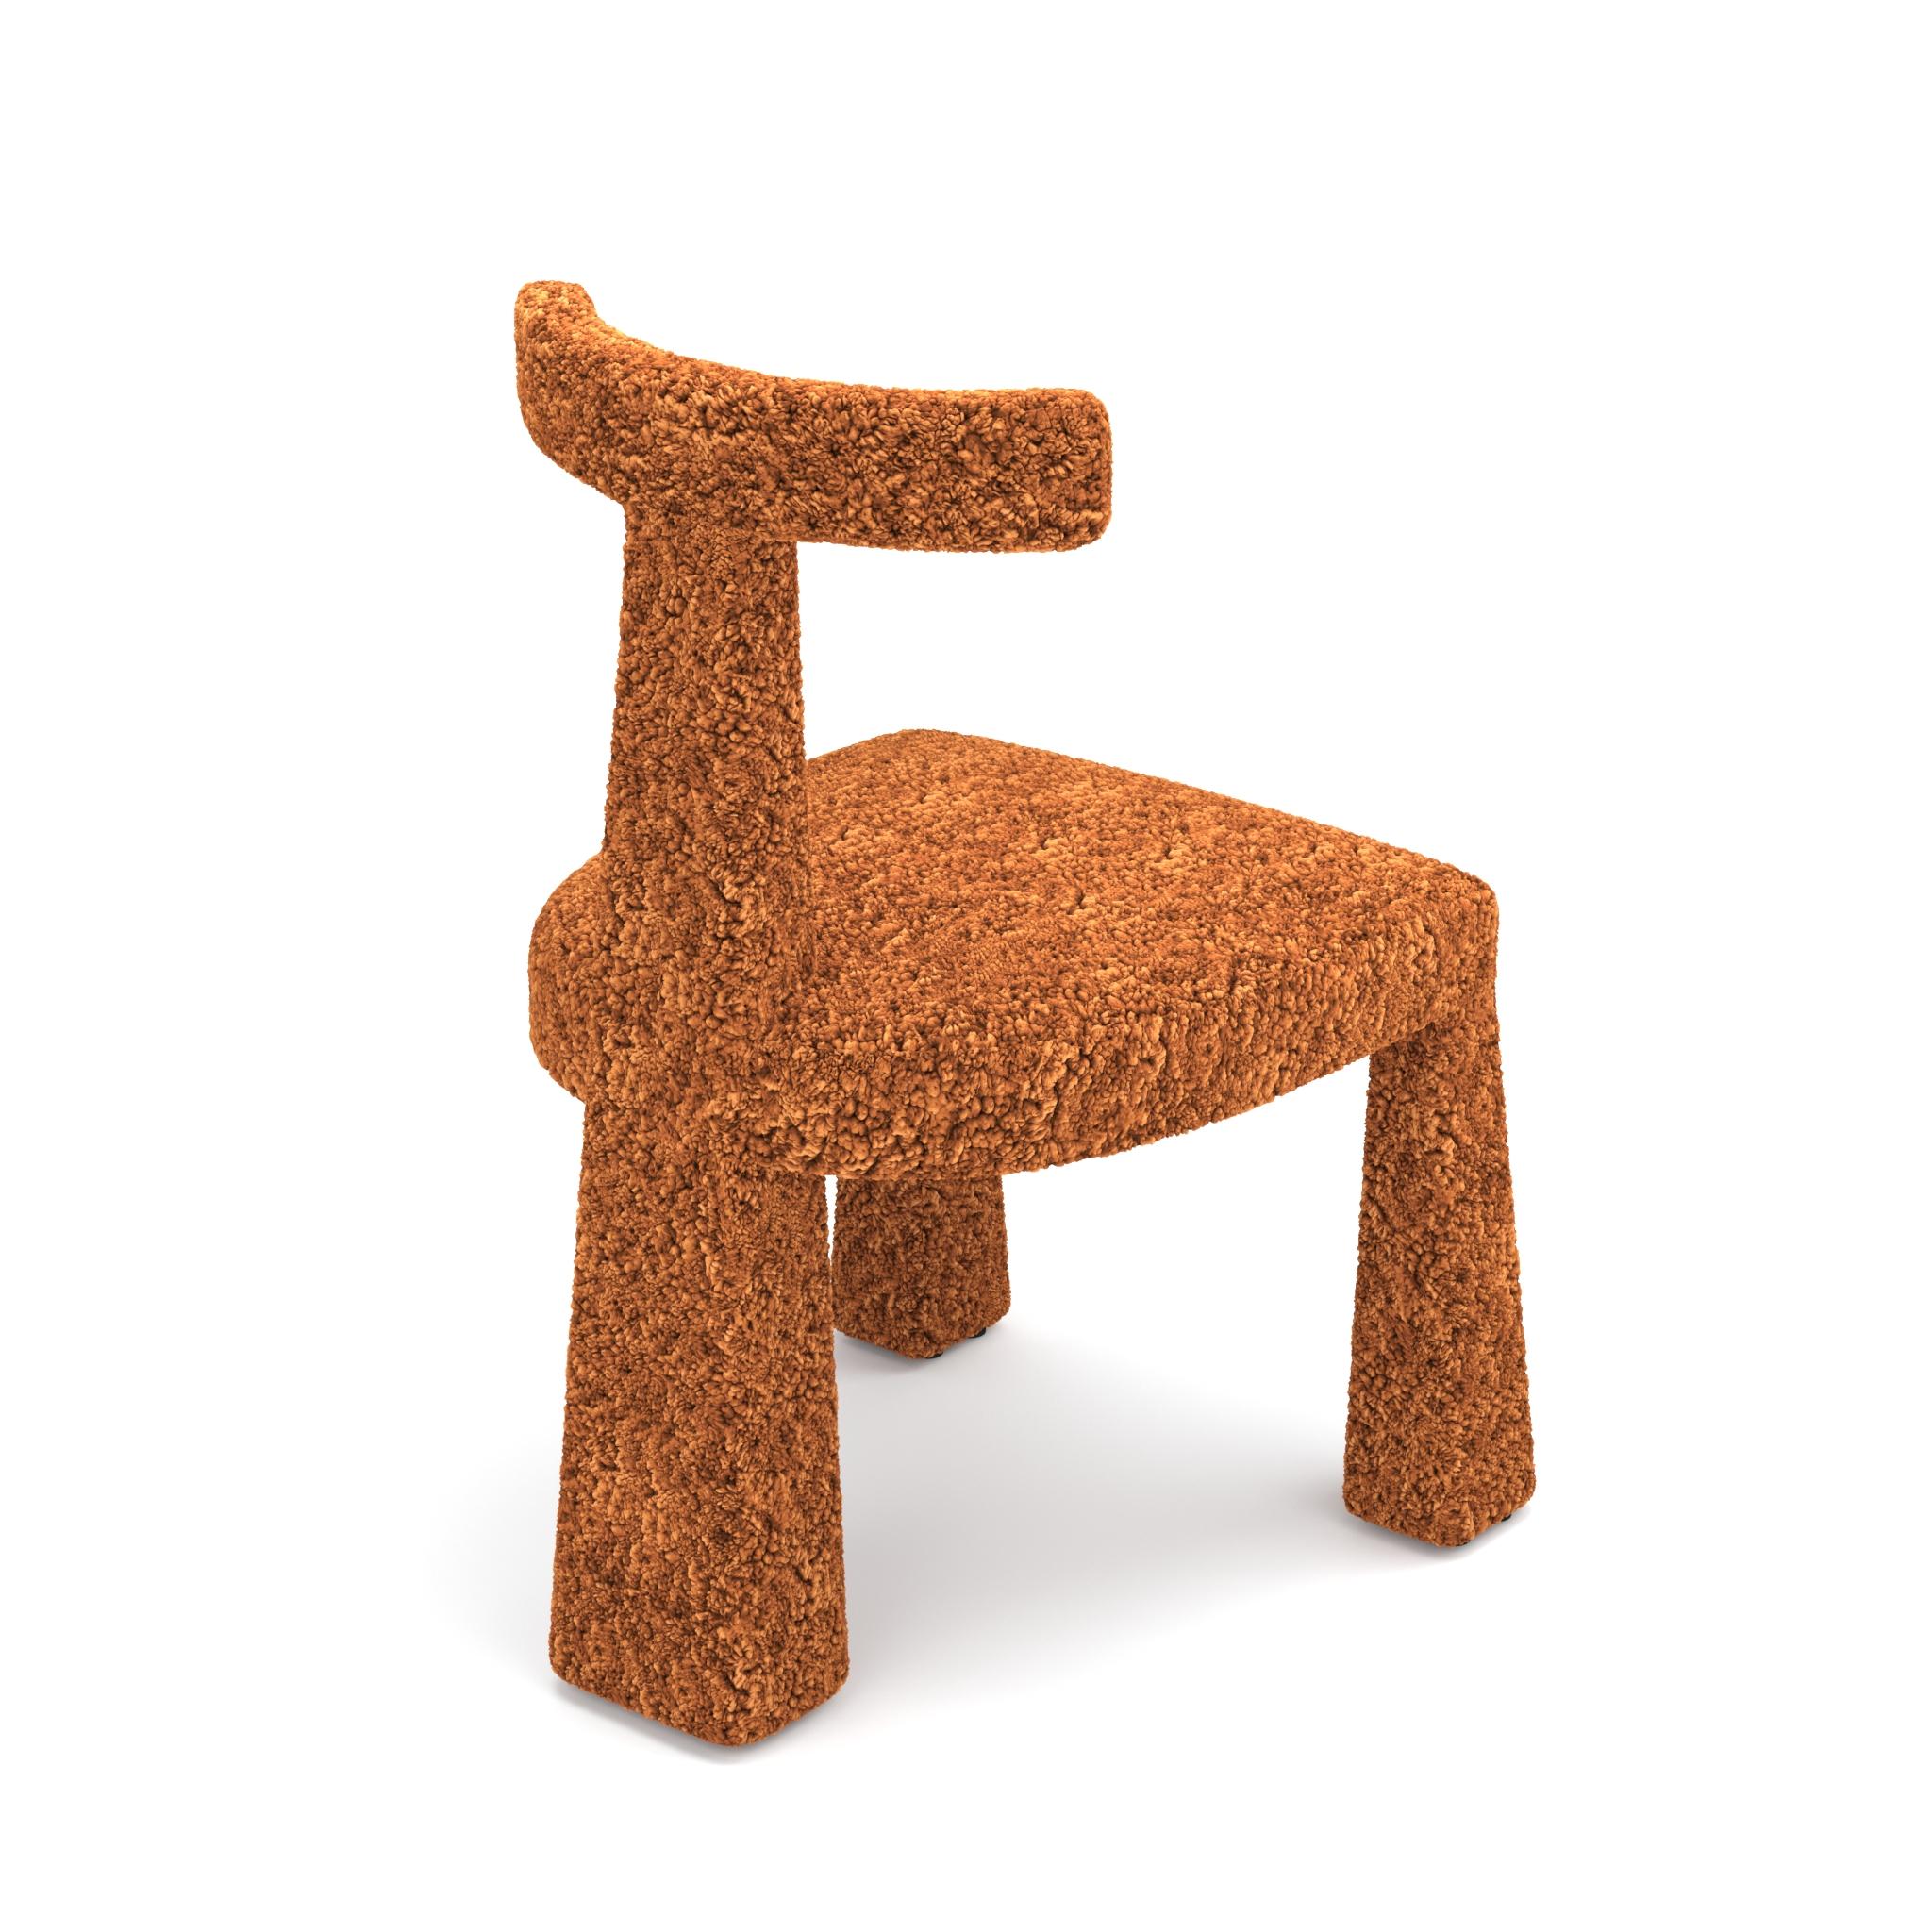 Solid wood frame featuring sleek and angular silhouette.
The chair is very stable and suitable for contract and hospitality.
Plastic gliders protects hard floors from scratching.
Pictured materials: Faux sheepskin Golden Sunset
COM available upon